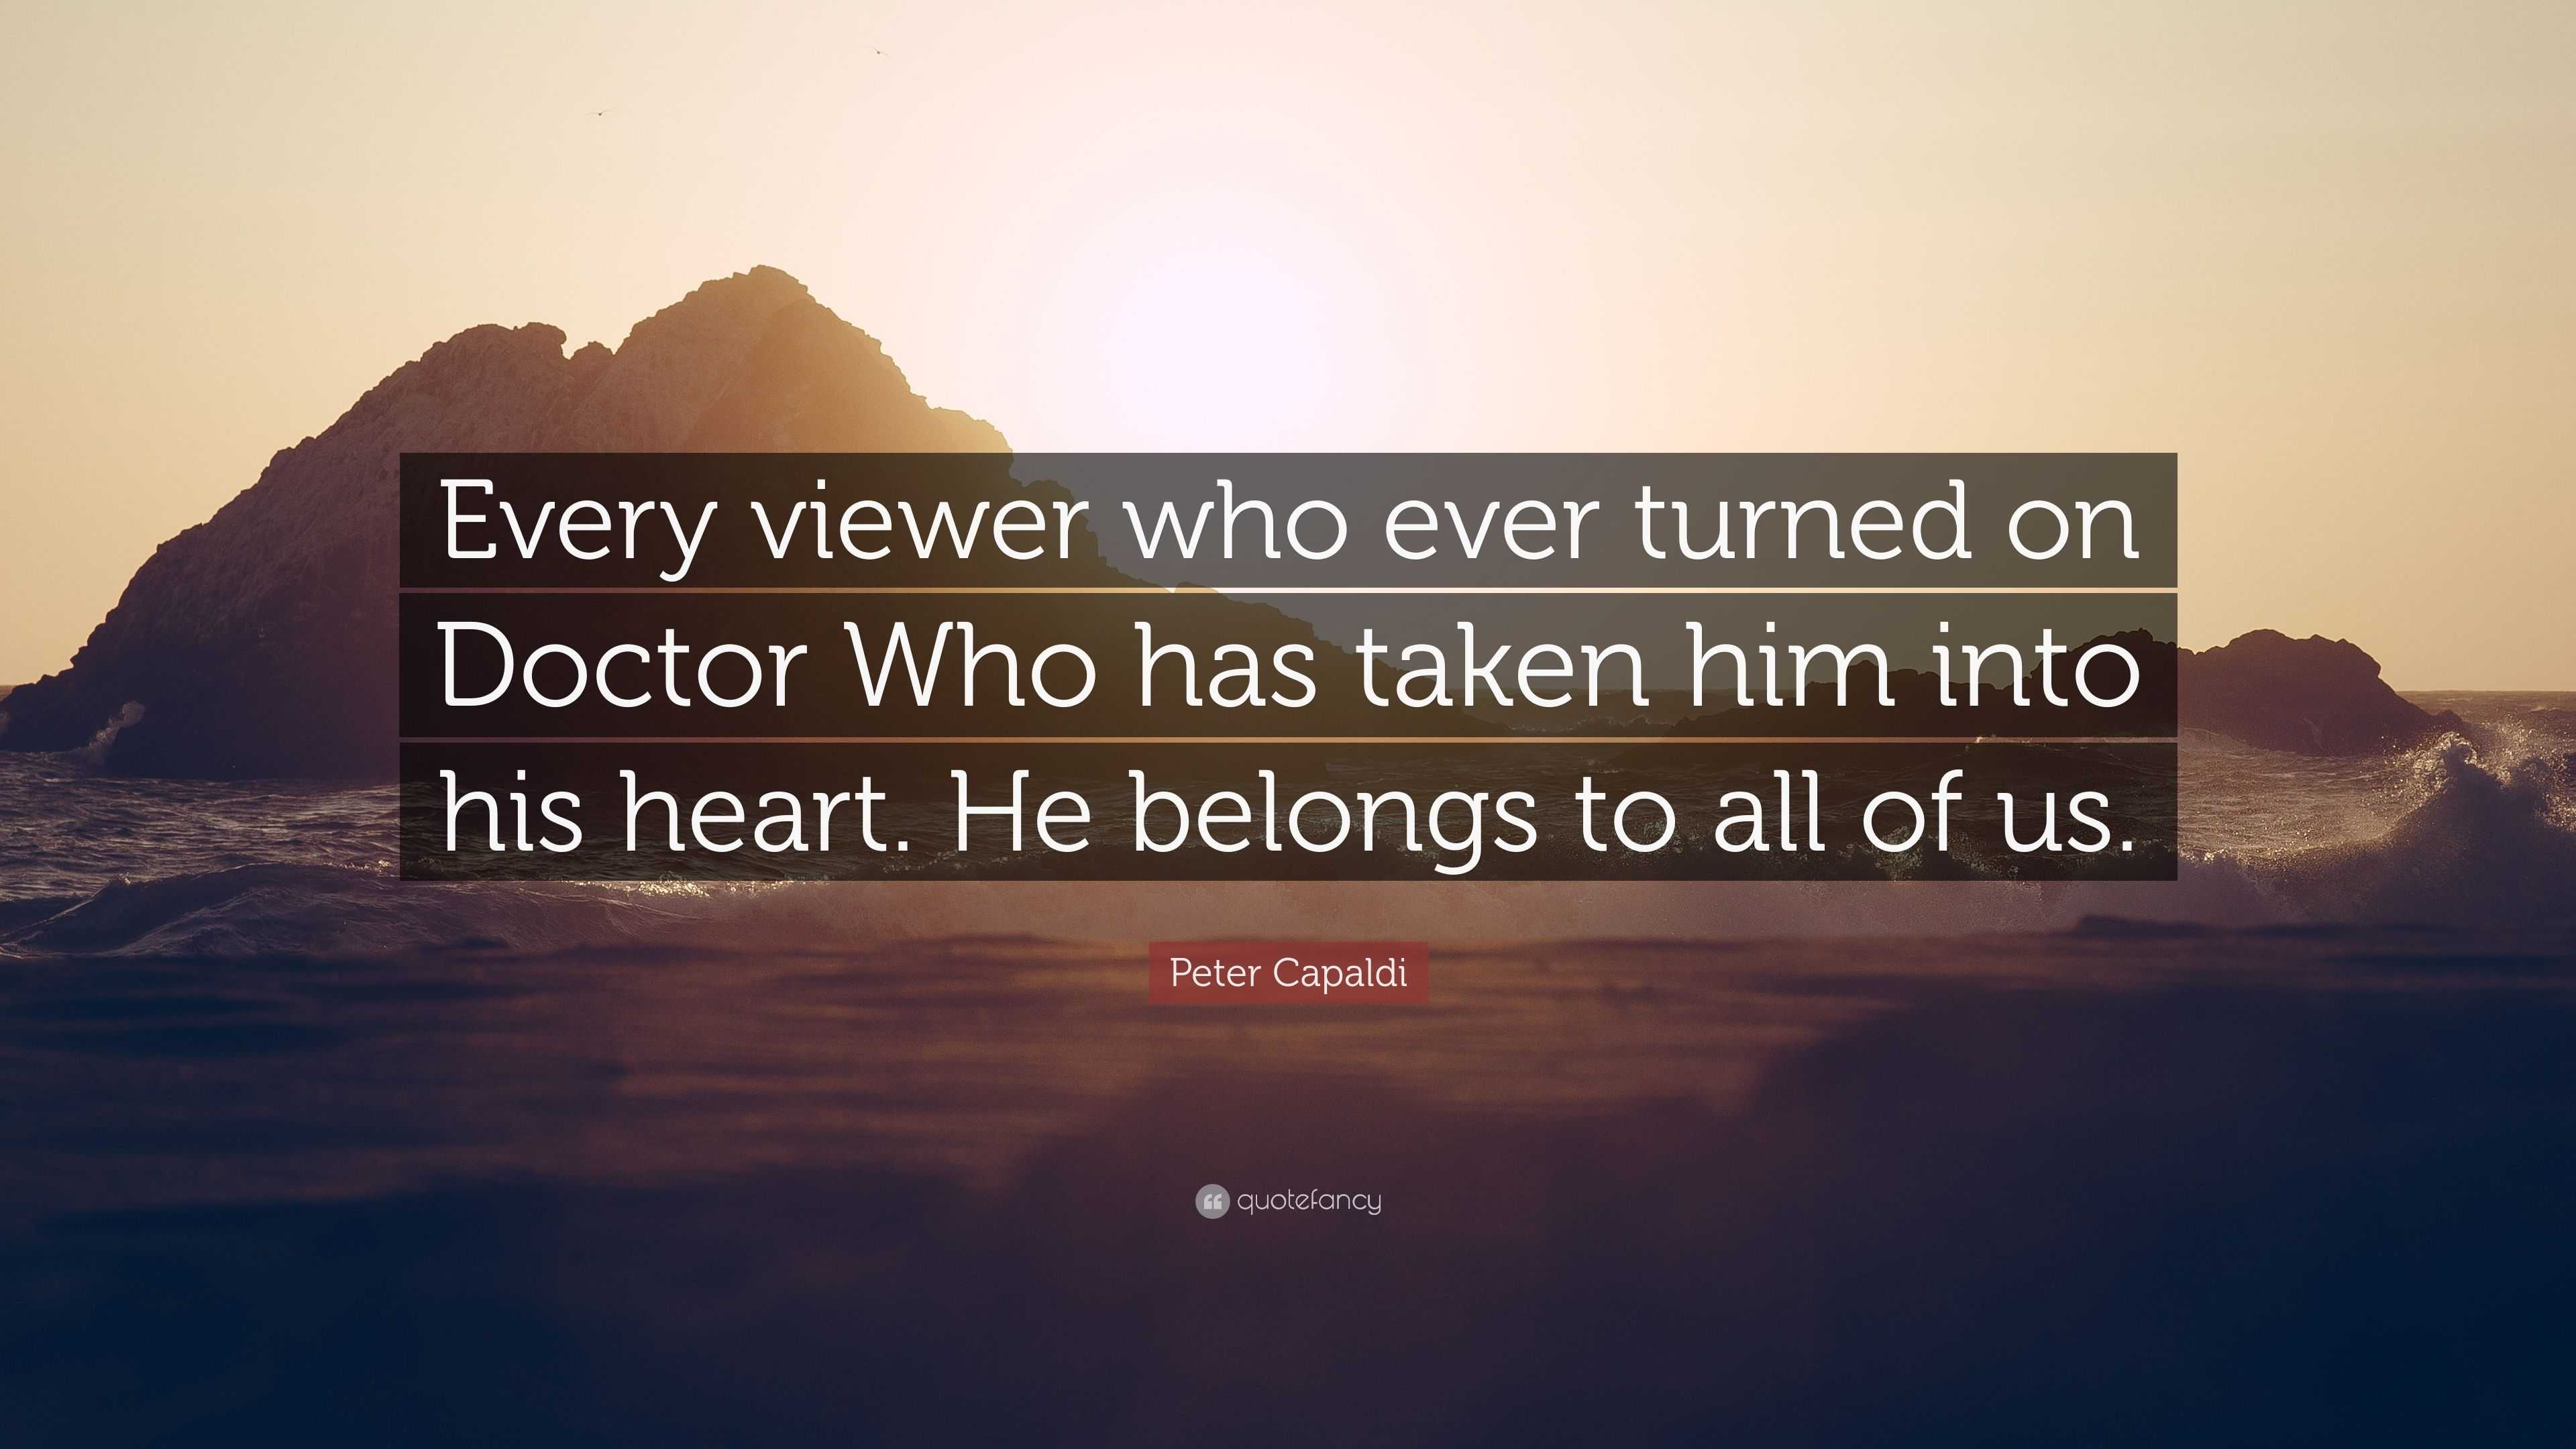 Peter Capaldi Quote “every Viewer Who Ever Turned On Doctor Who Has